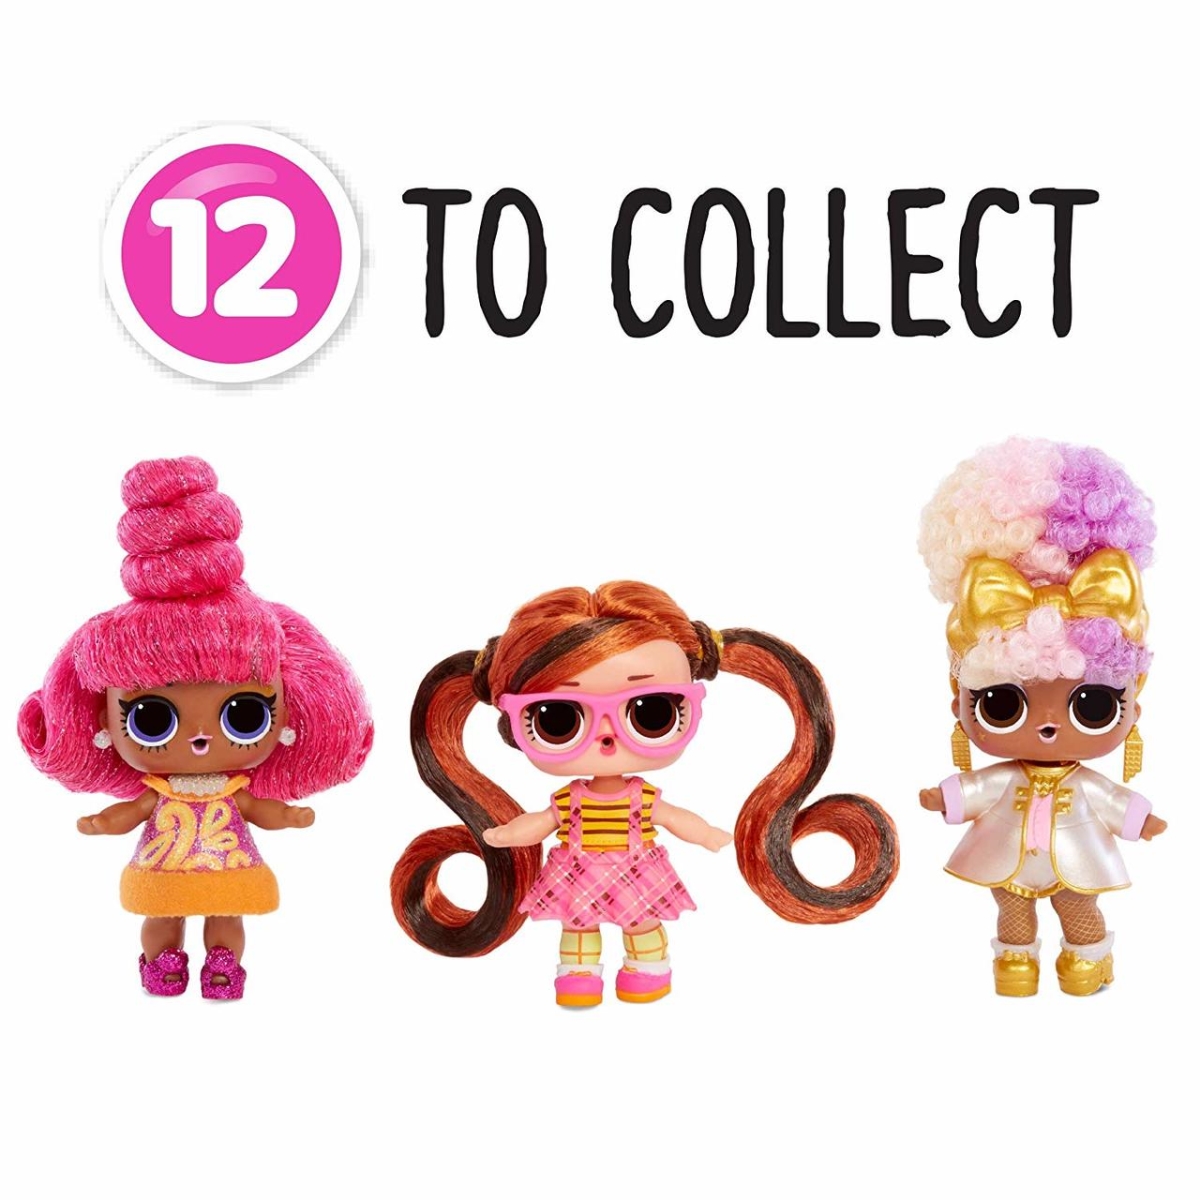 30373260 Lol Surprise Hairvibes Dolls With 15 Surprises & Mix & Match Hairpieces